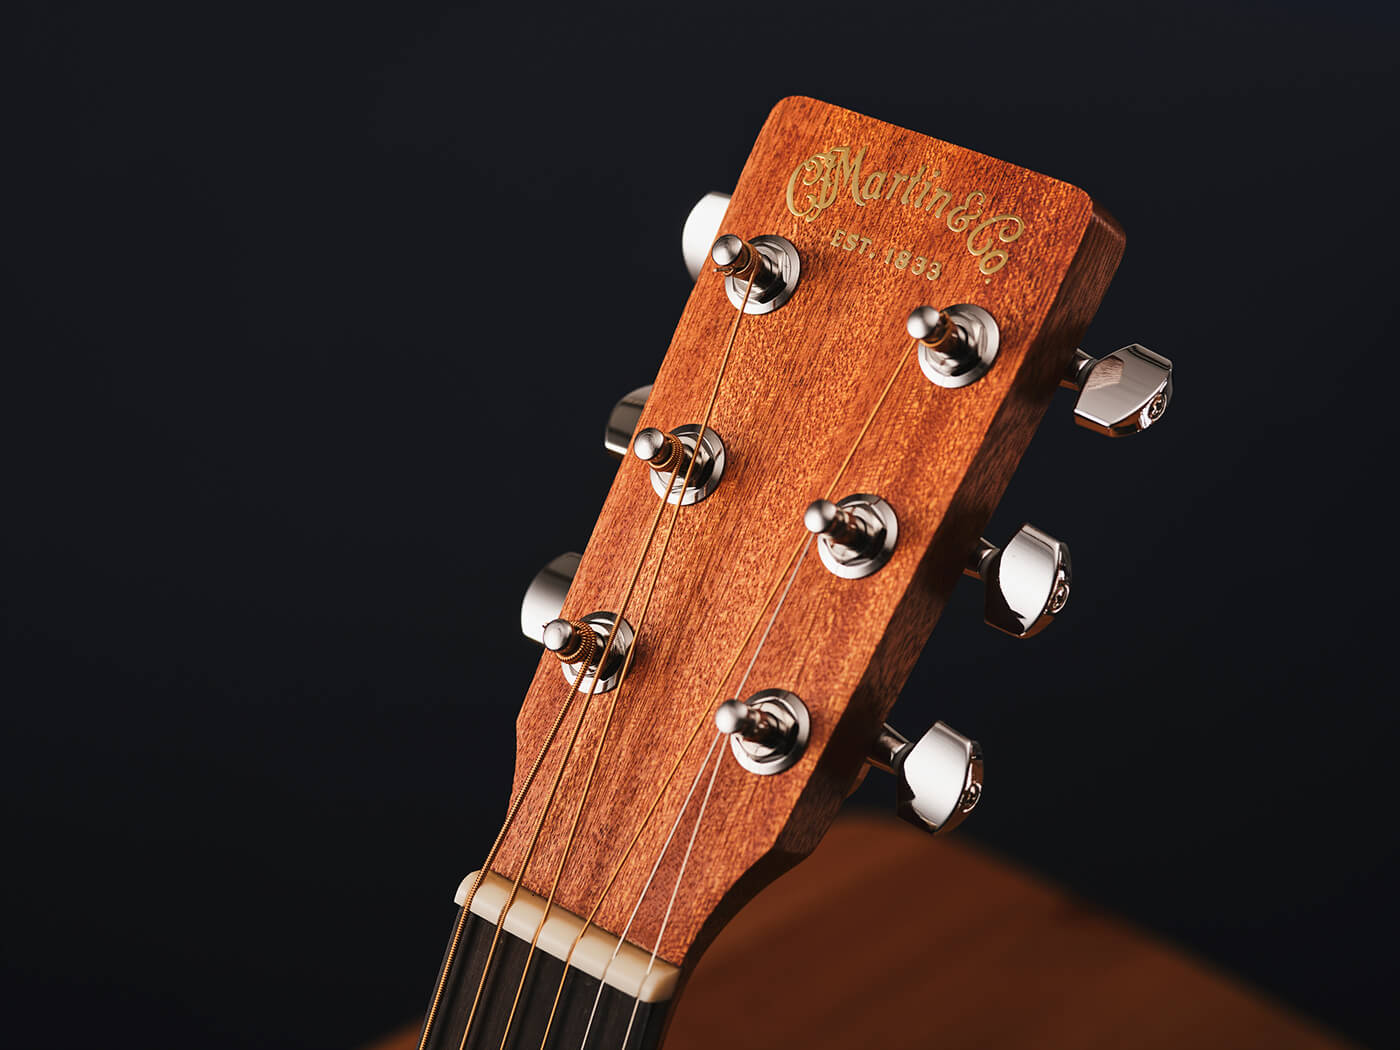 Headstock of Shawn Mendes’ signature Martin guitar, the 000JR-10E Shawn Mendes, photo by Adam Gasson